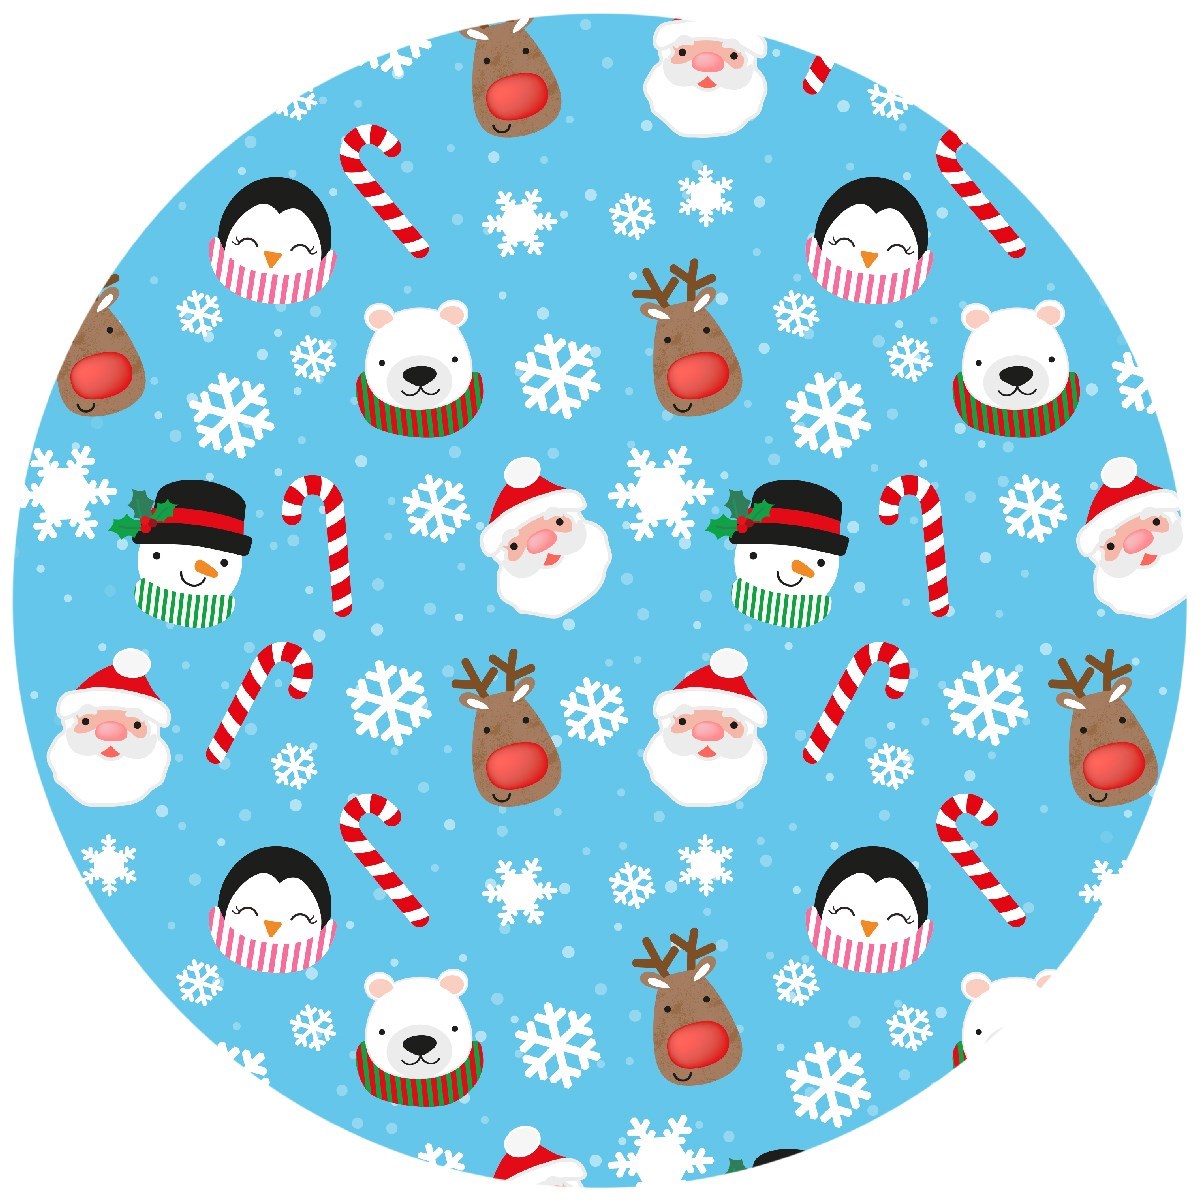 10" Masonite Christmas Friends Cake Board - Blue with Santa and Friends (4mm Thick)